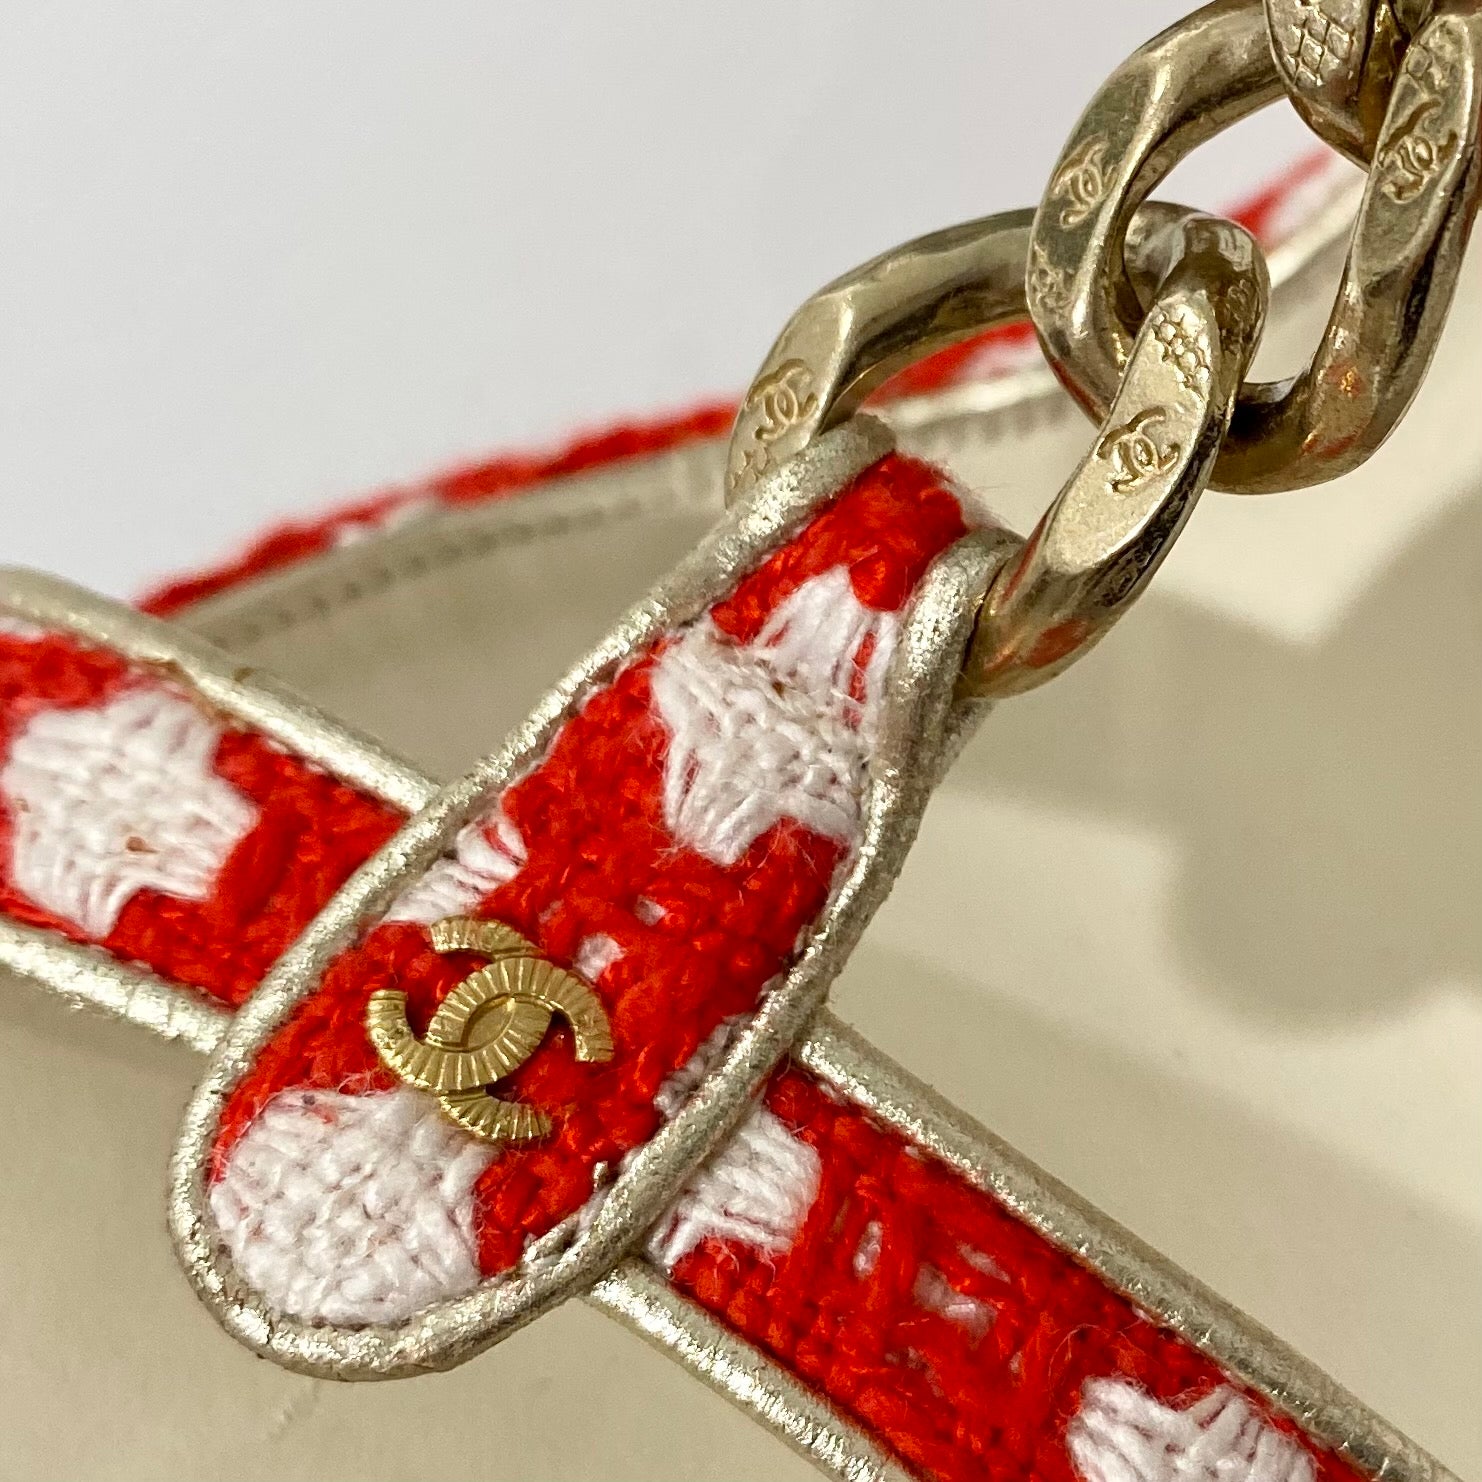 Chanel Red and White Tweed Heels